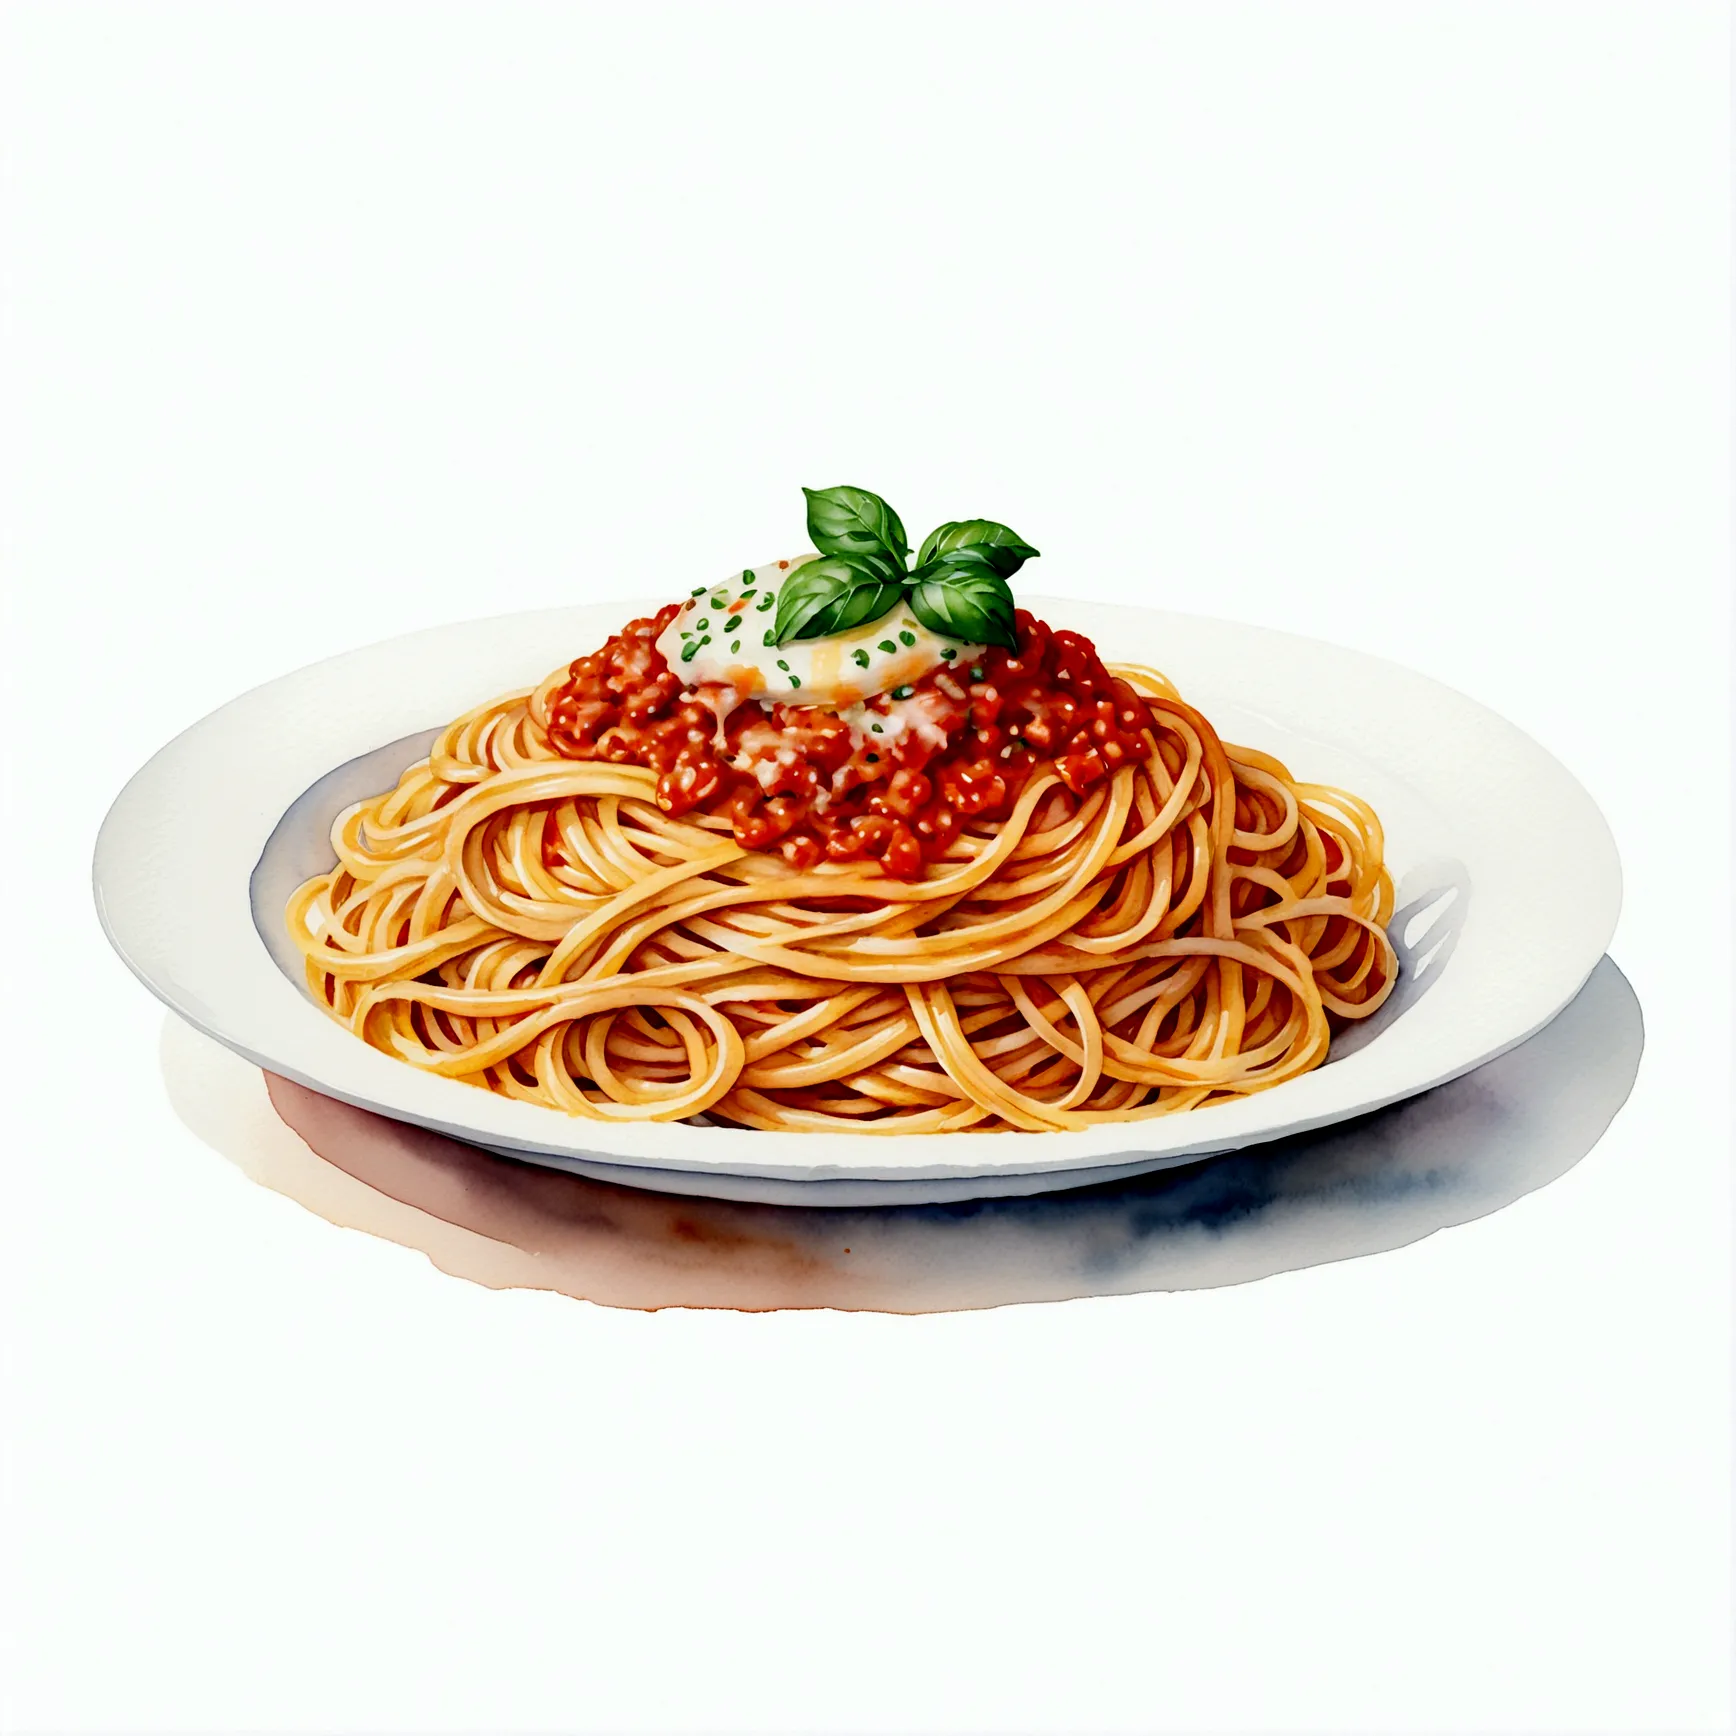 there is a huge extremely delicious spaghetti, illustration, isolated with solid white background, surrounded with negative spac...